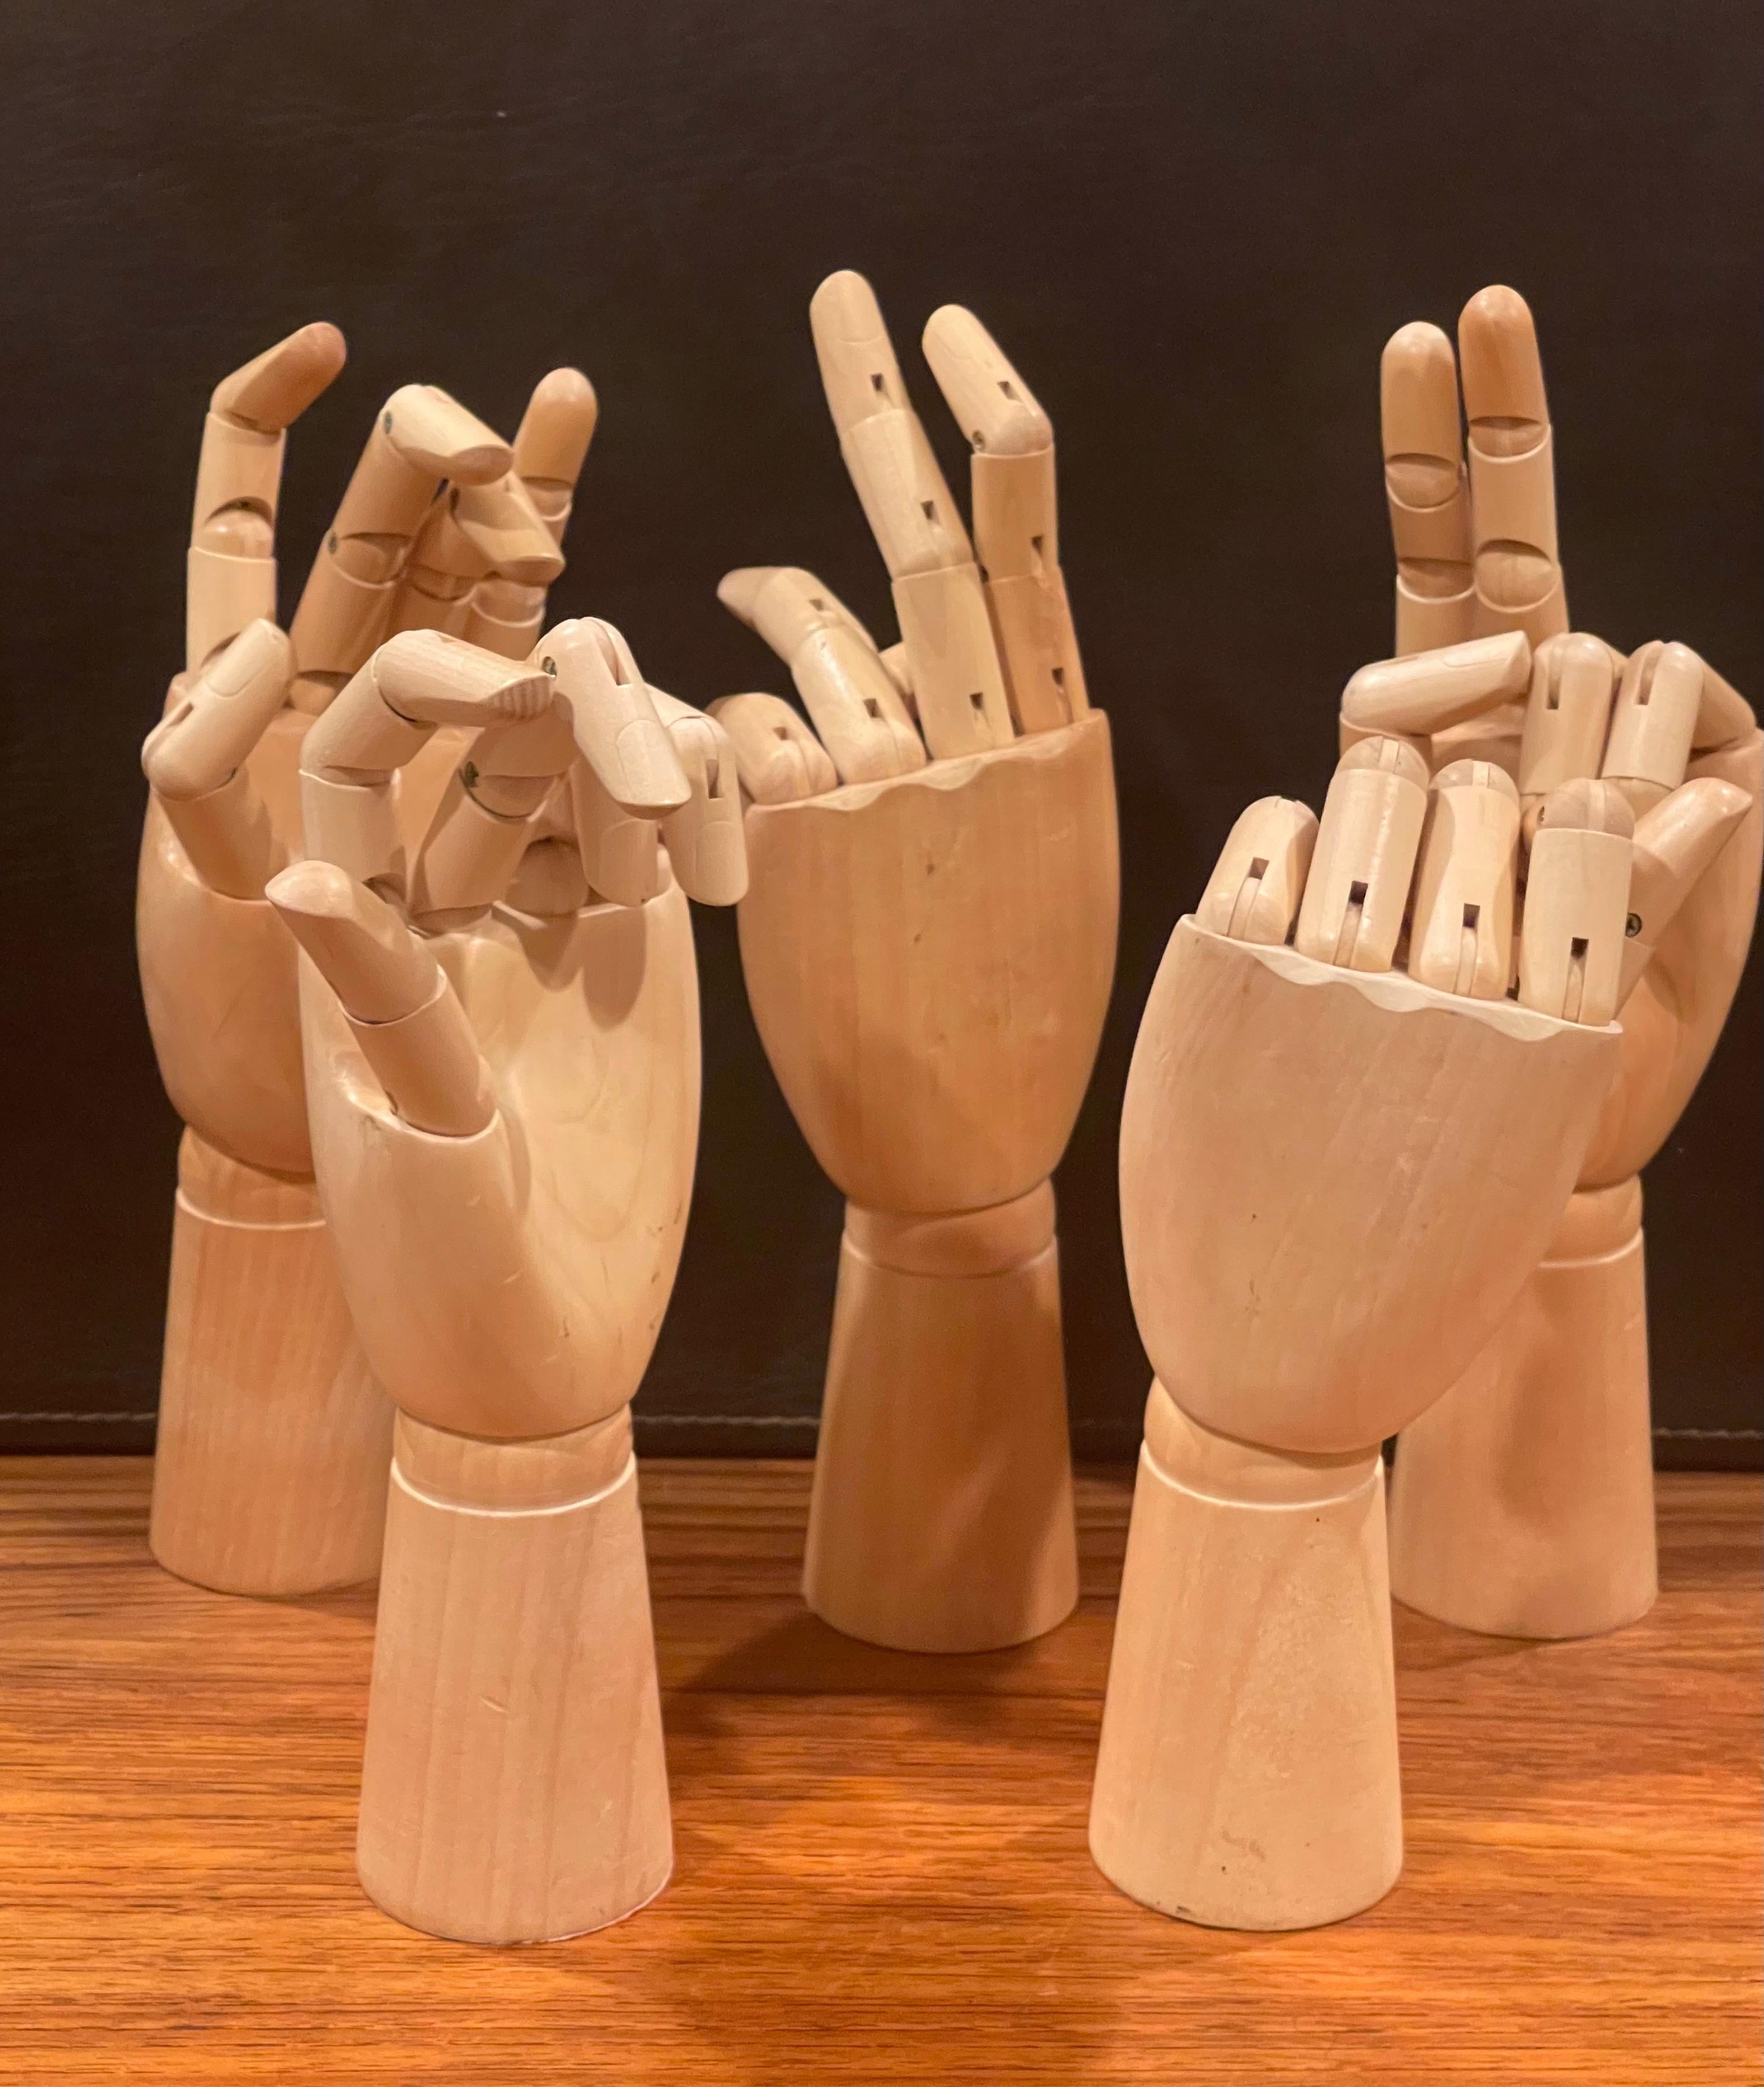 Unique set of five articulating hands, circa 1990s. The hands are extremely well made out of solid maple and have a number of articulating joints that allow the hands to be placed in an infinite amount of positions. They are in great condition and